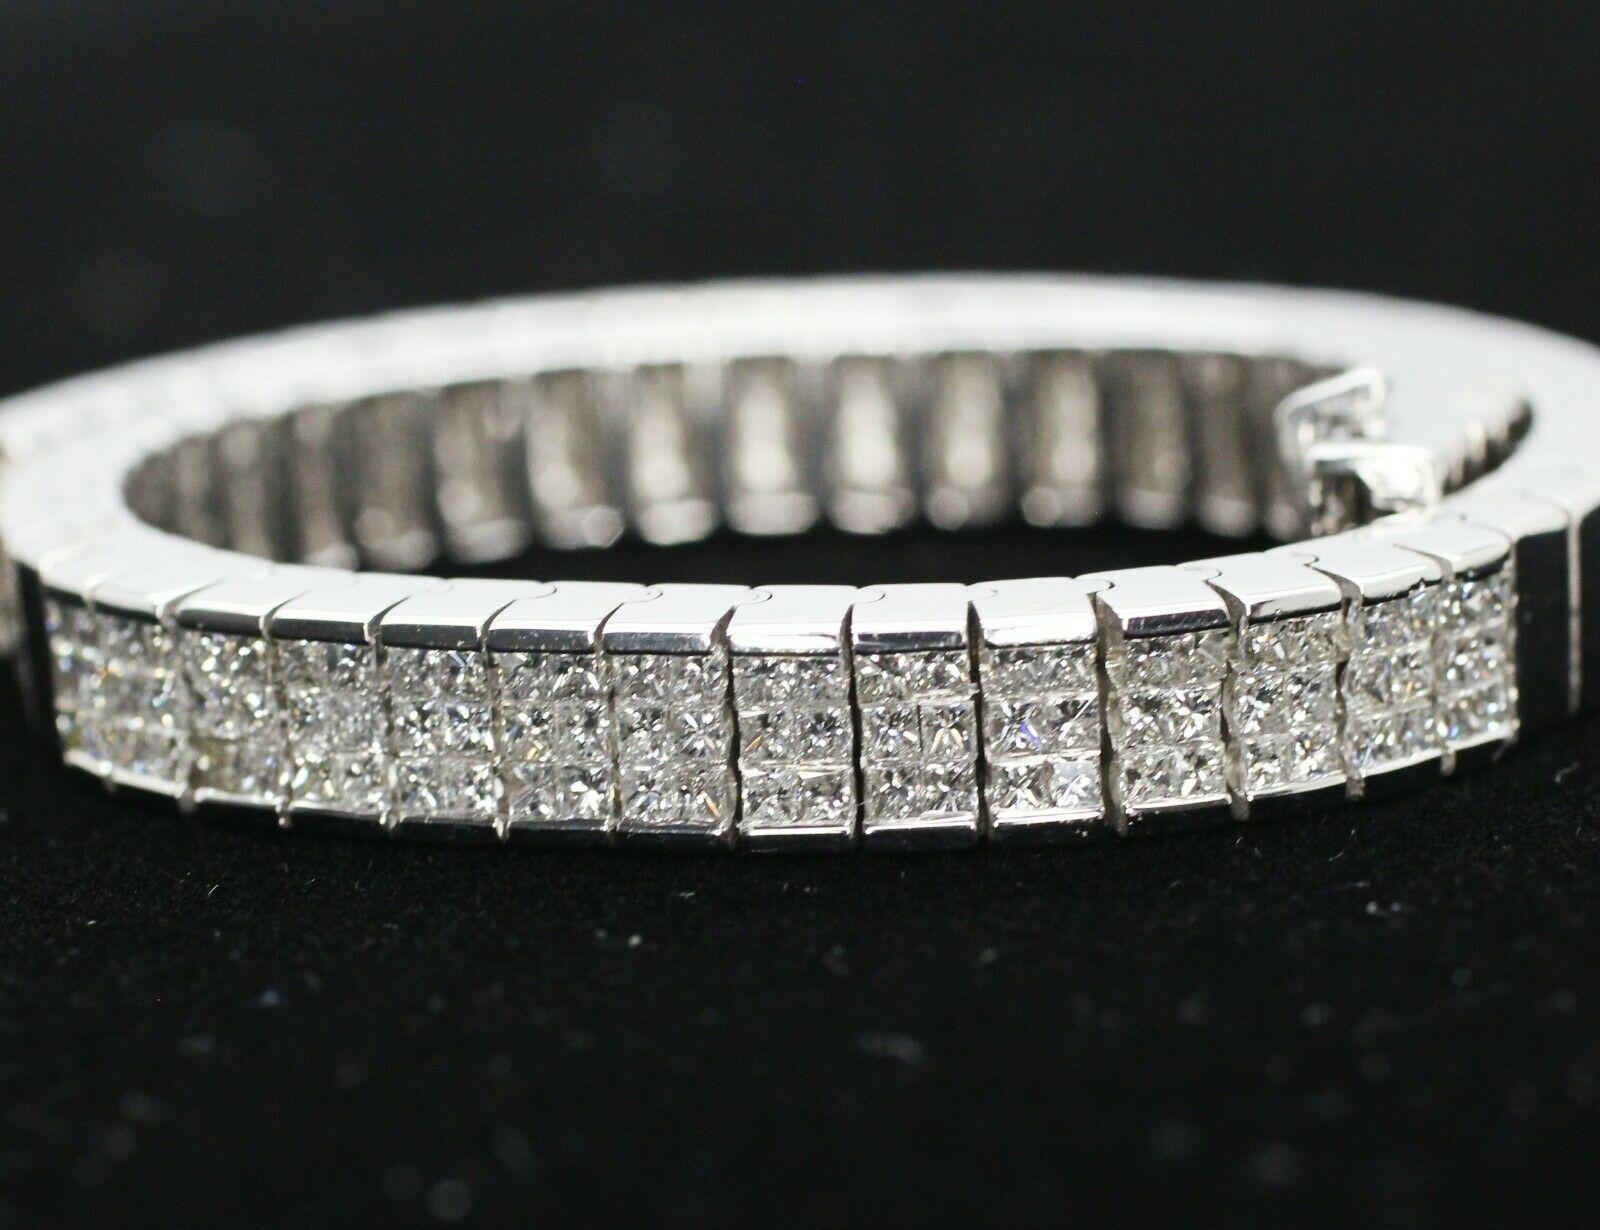  Invisible set diamond bracelet set in 14k white gold. There are 82 pieces of princess cut diamonds, with a clarity of VS and color of G/H in 1.50 carat total weight..The diamonds are invisible set in the high polish bracelet which has a width of